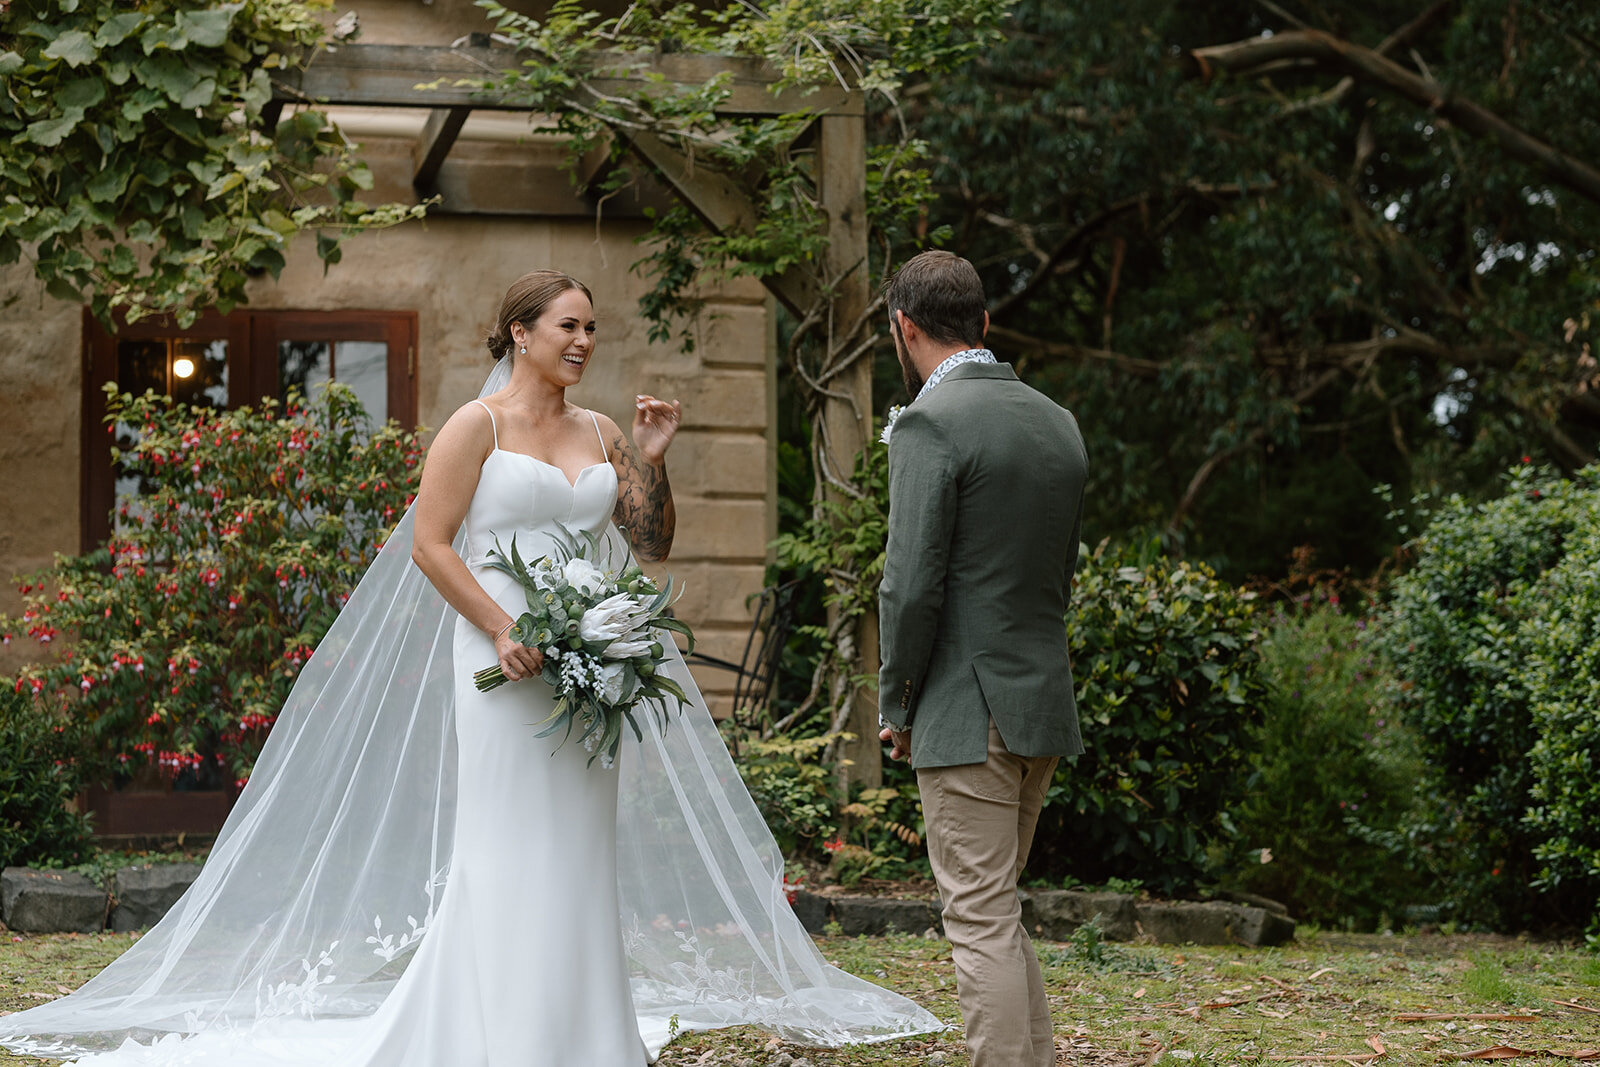 Stacey&Cory-Coast&Pines-55